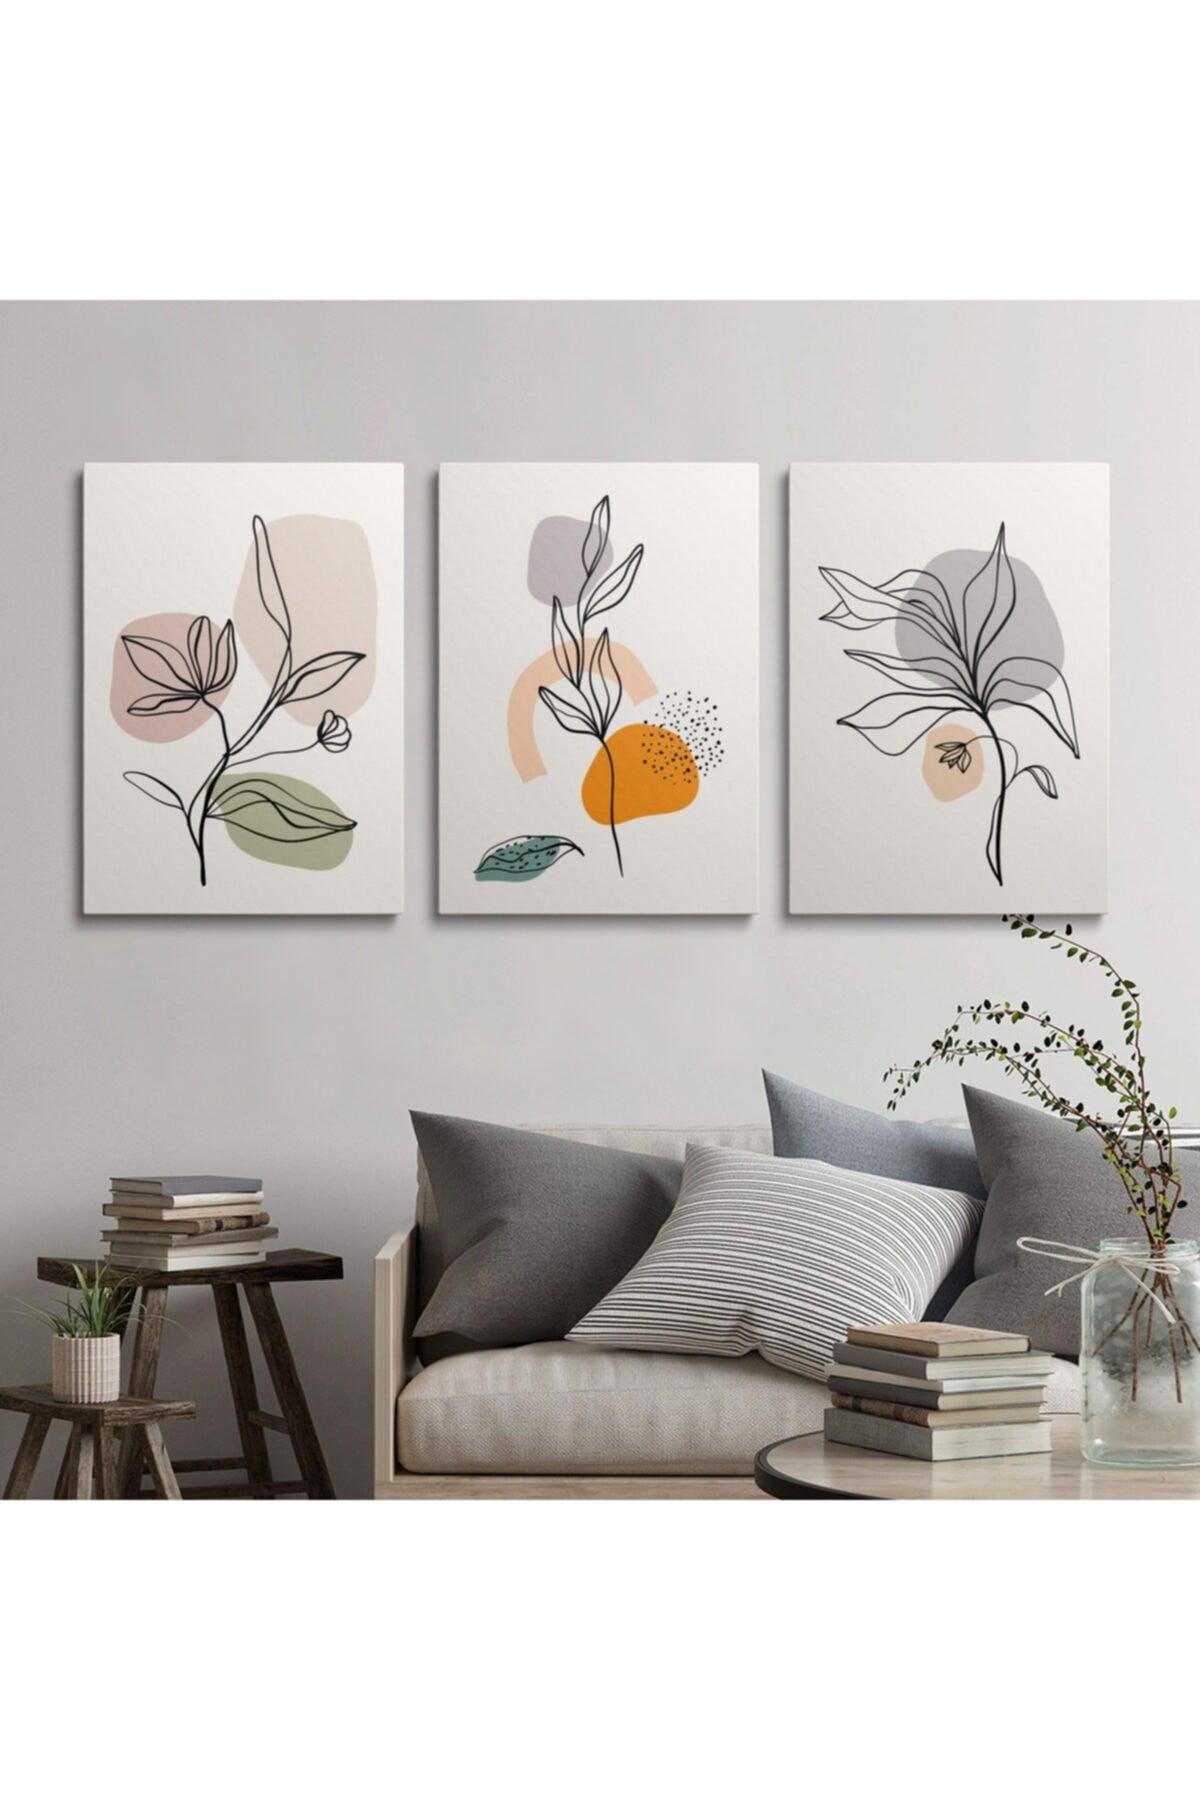 Canvas Wall Painting Abstract Flowers Set of 3 Paintings - Swordslife